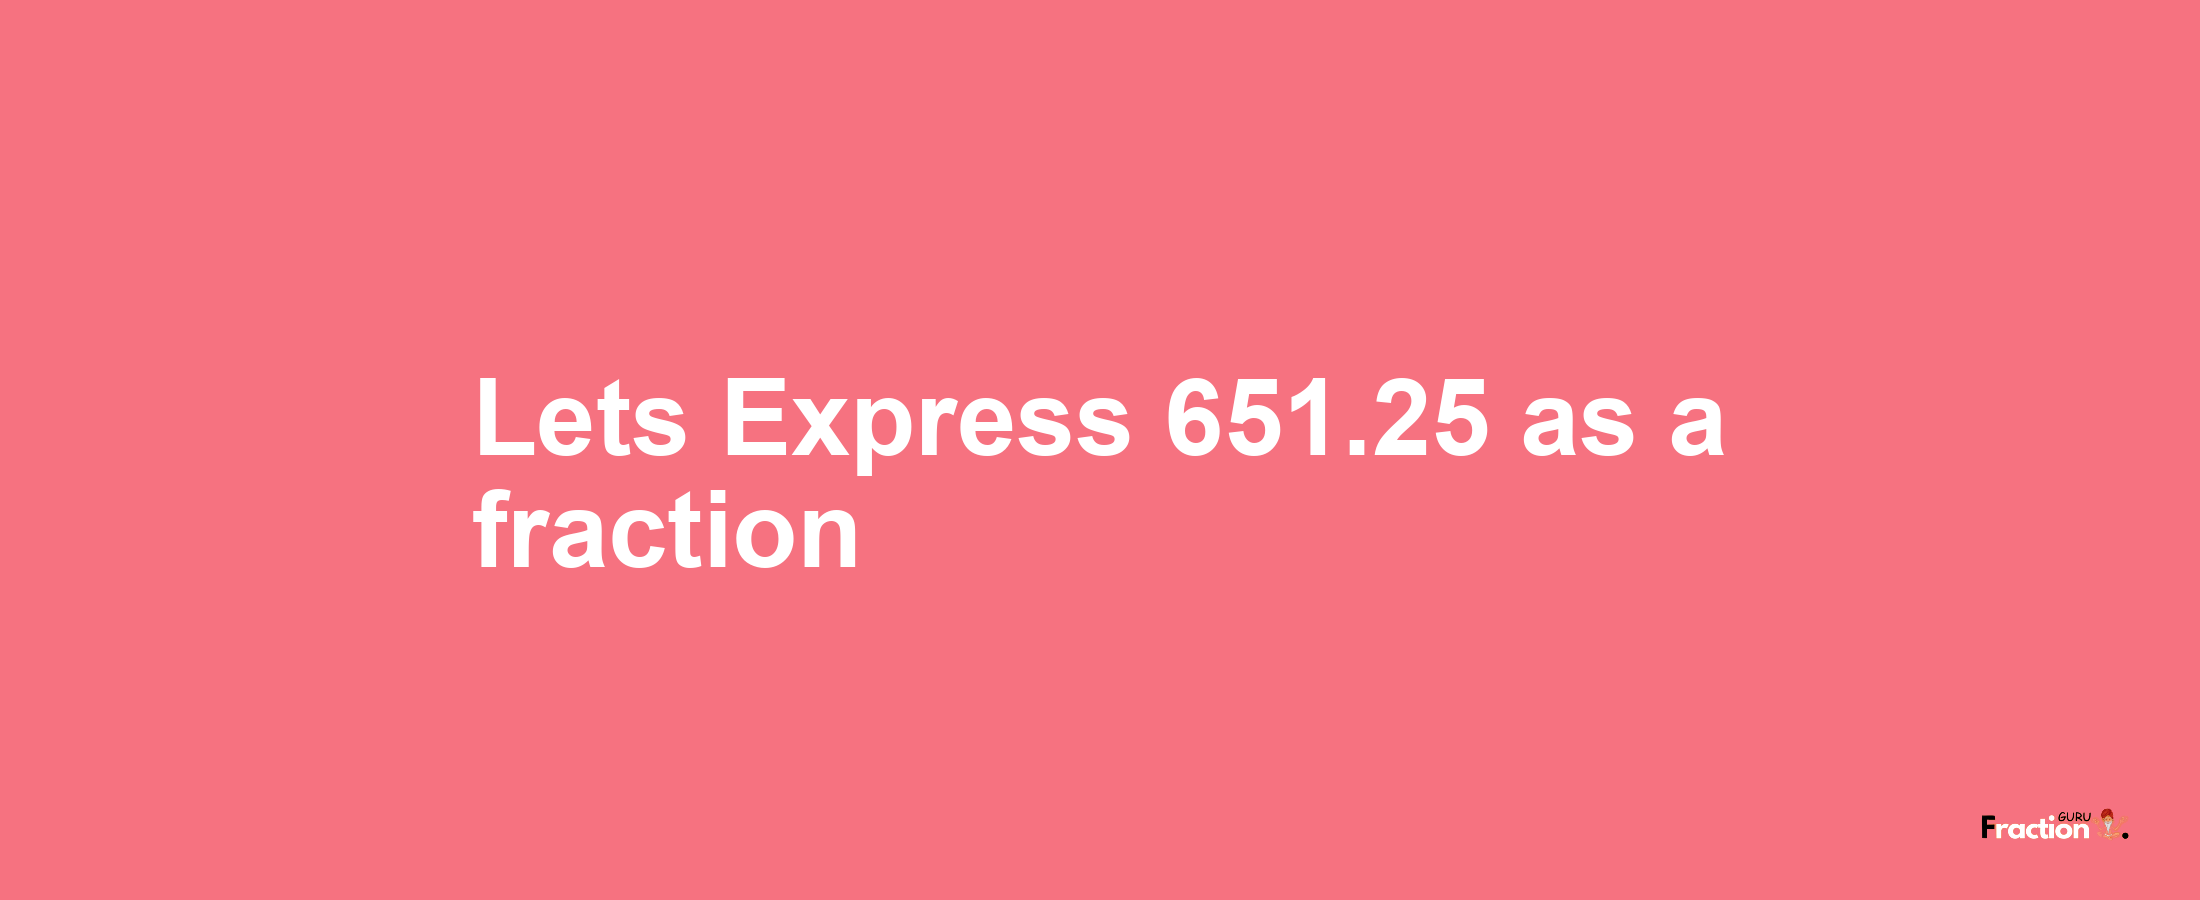 Lets Express 651.25 as afraction